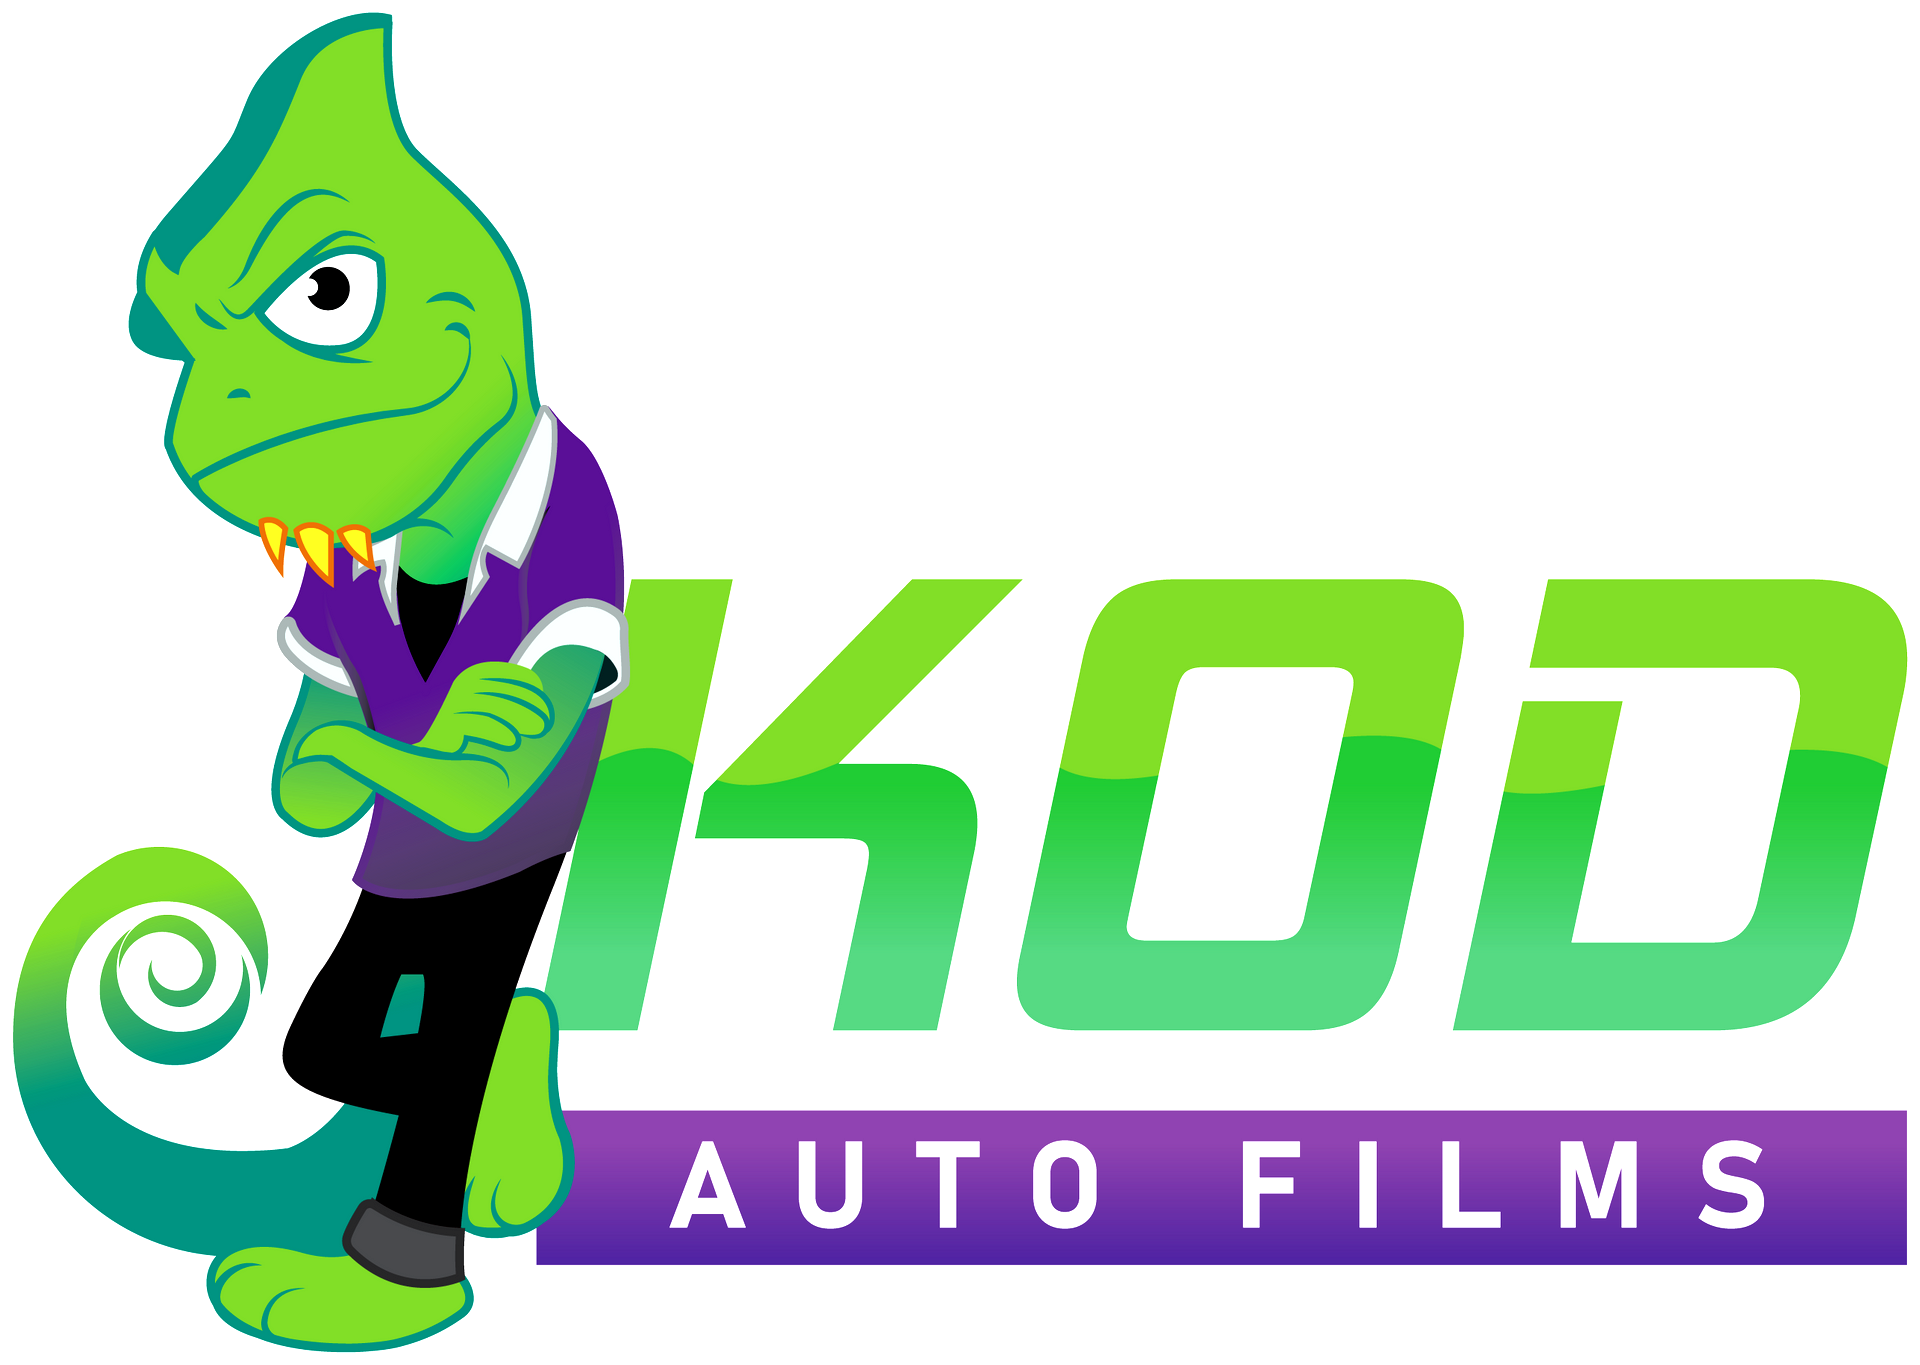 a logo for kod auto films with a chameleon on it